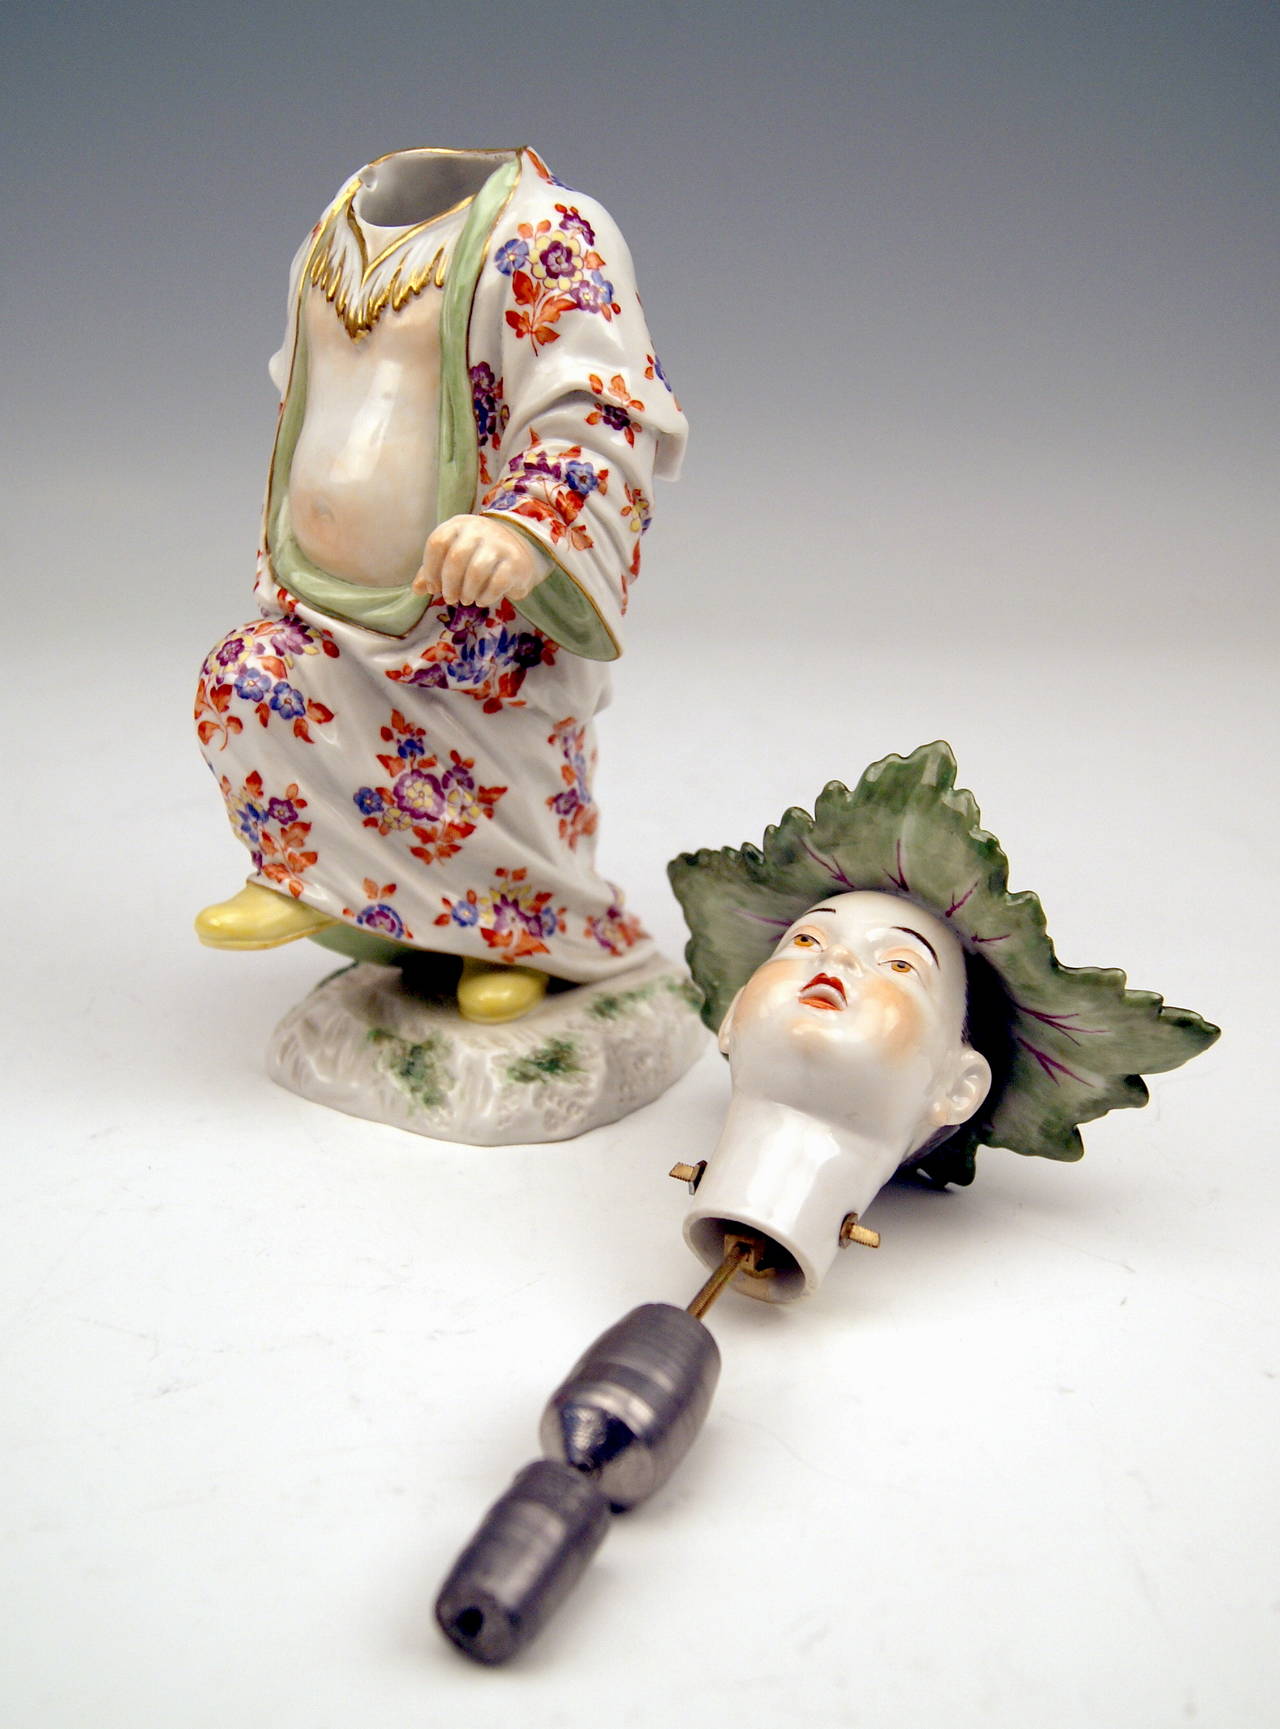 Porcelain Meissen Chinese Boy with Hat made of Cabbages' Leaves Kändler made 20th century